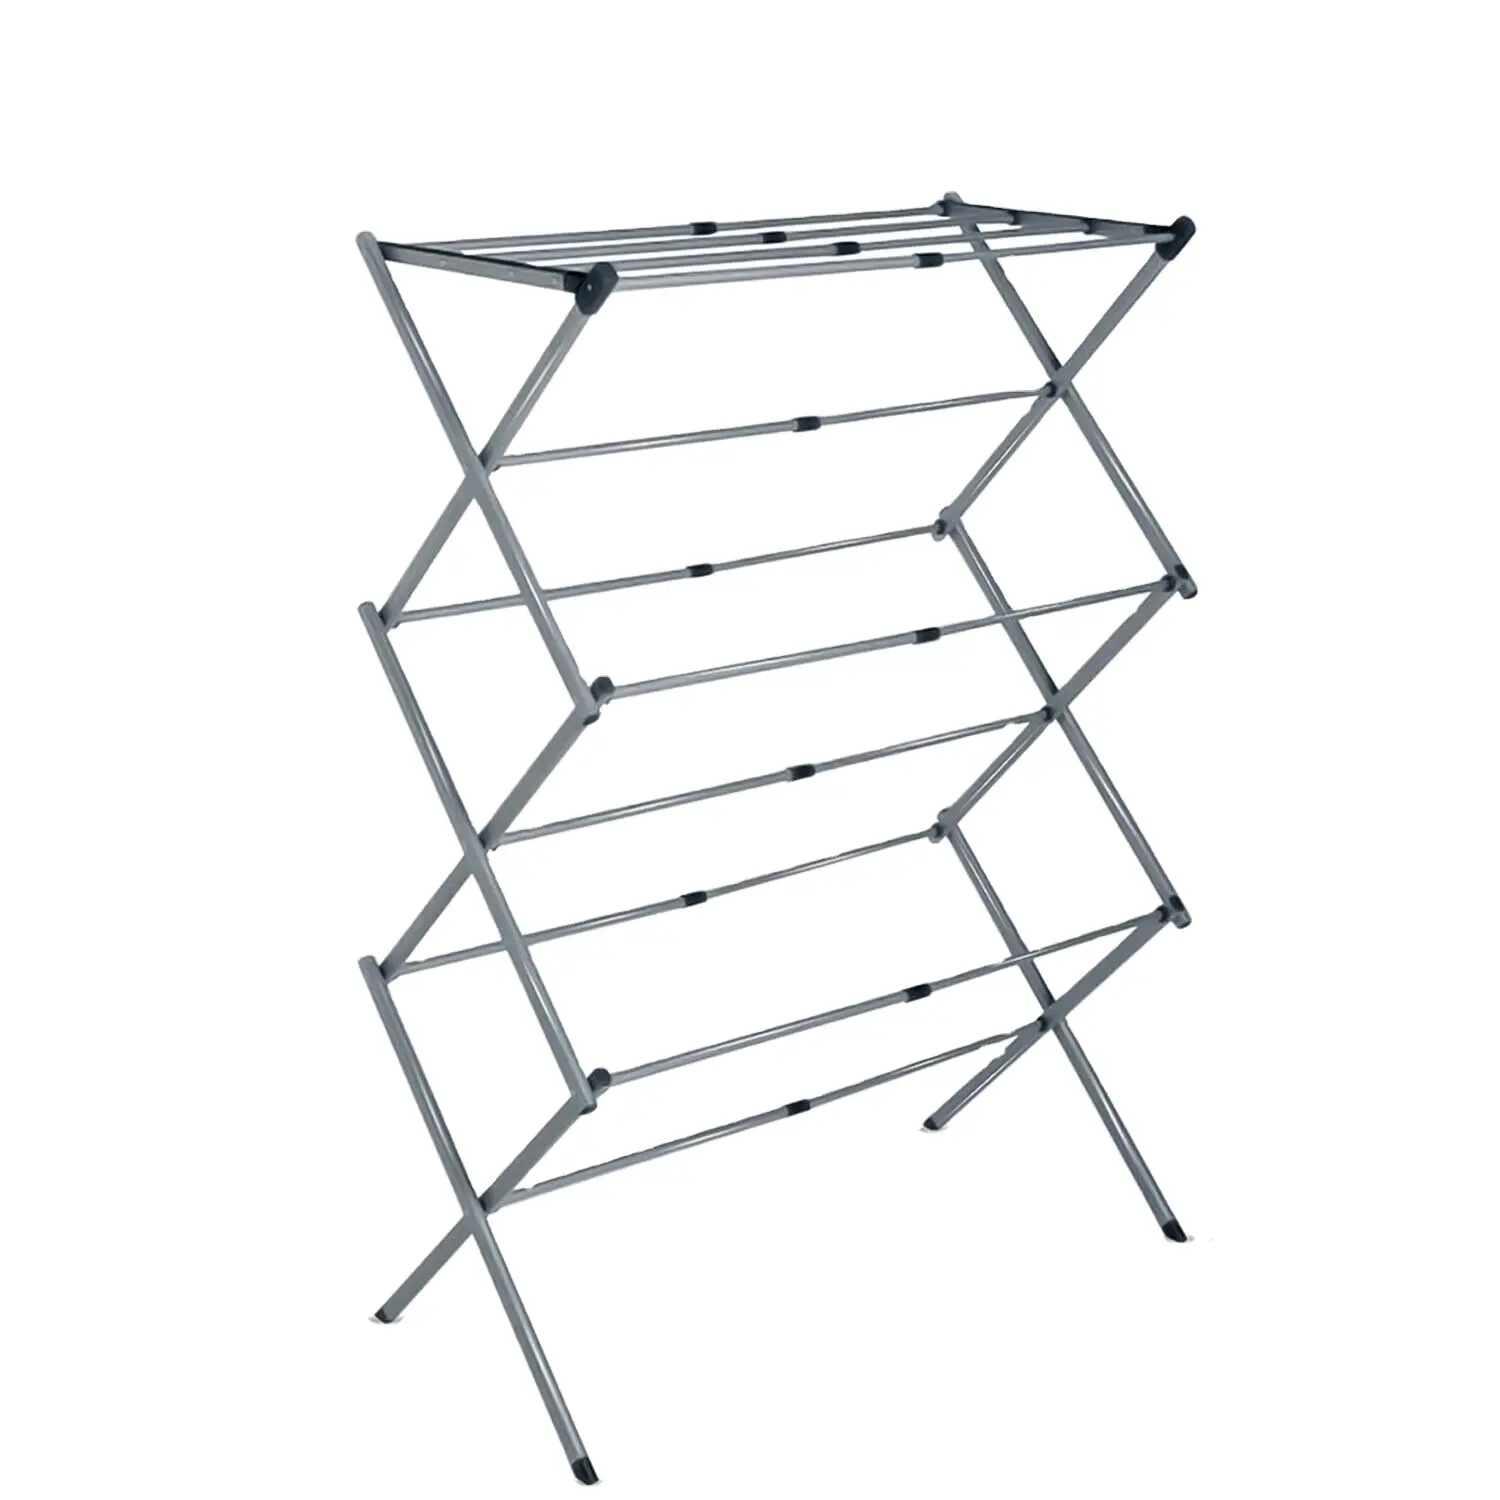 Heavy Duty 3 Tier Foldable Expandable Clothes Airer Laundry Drying Racks Hangers indoor use